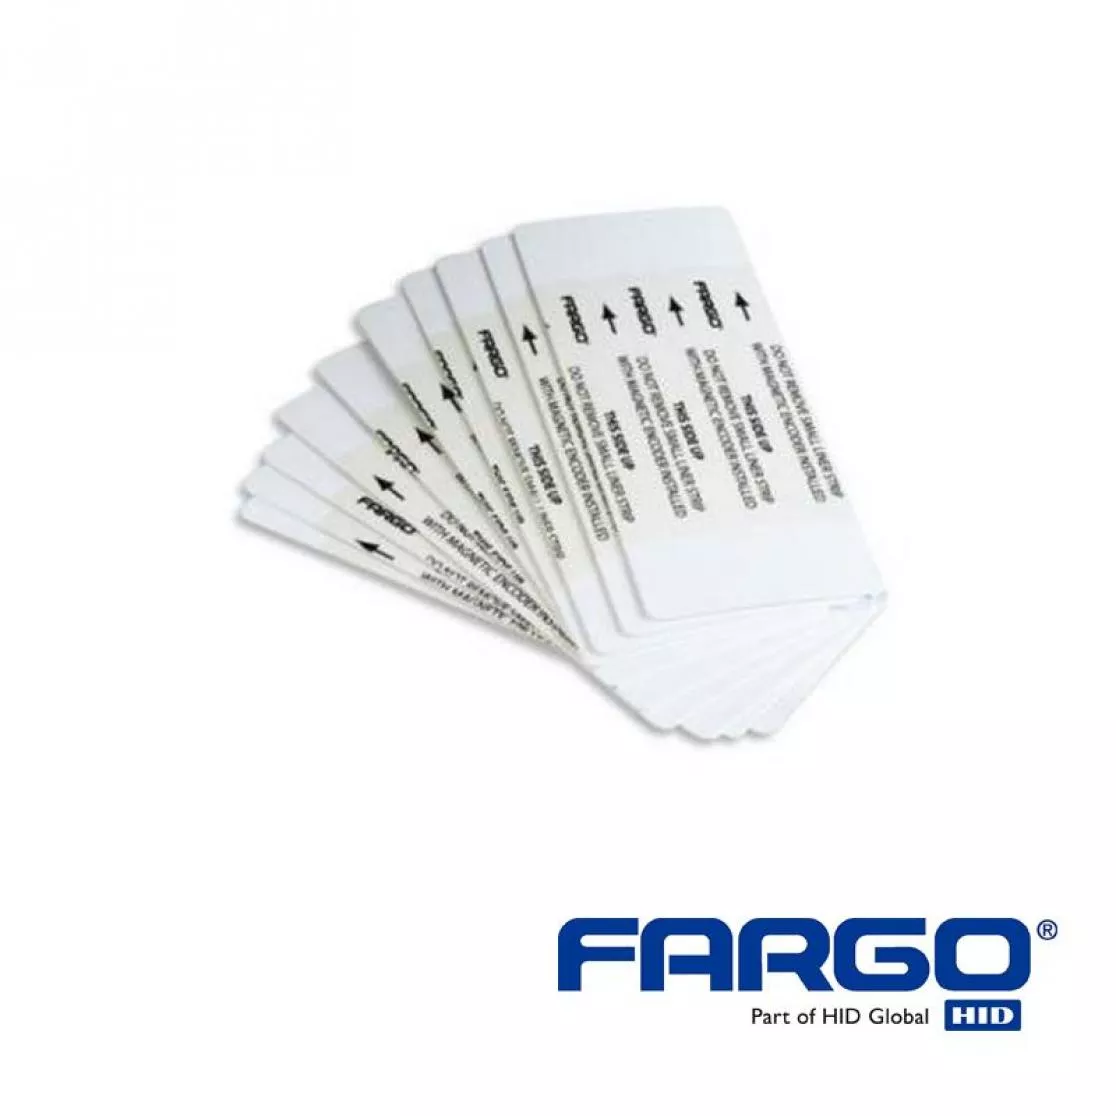 Cleaning card double-sided for hid fargo HDP6600 card printer